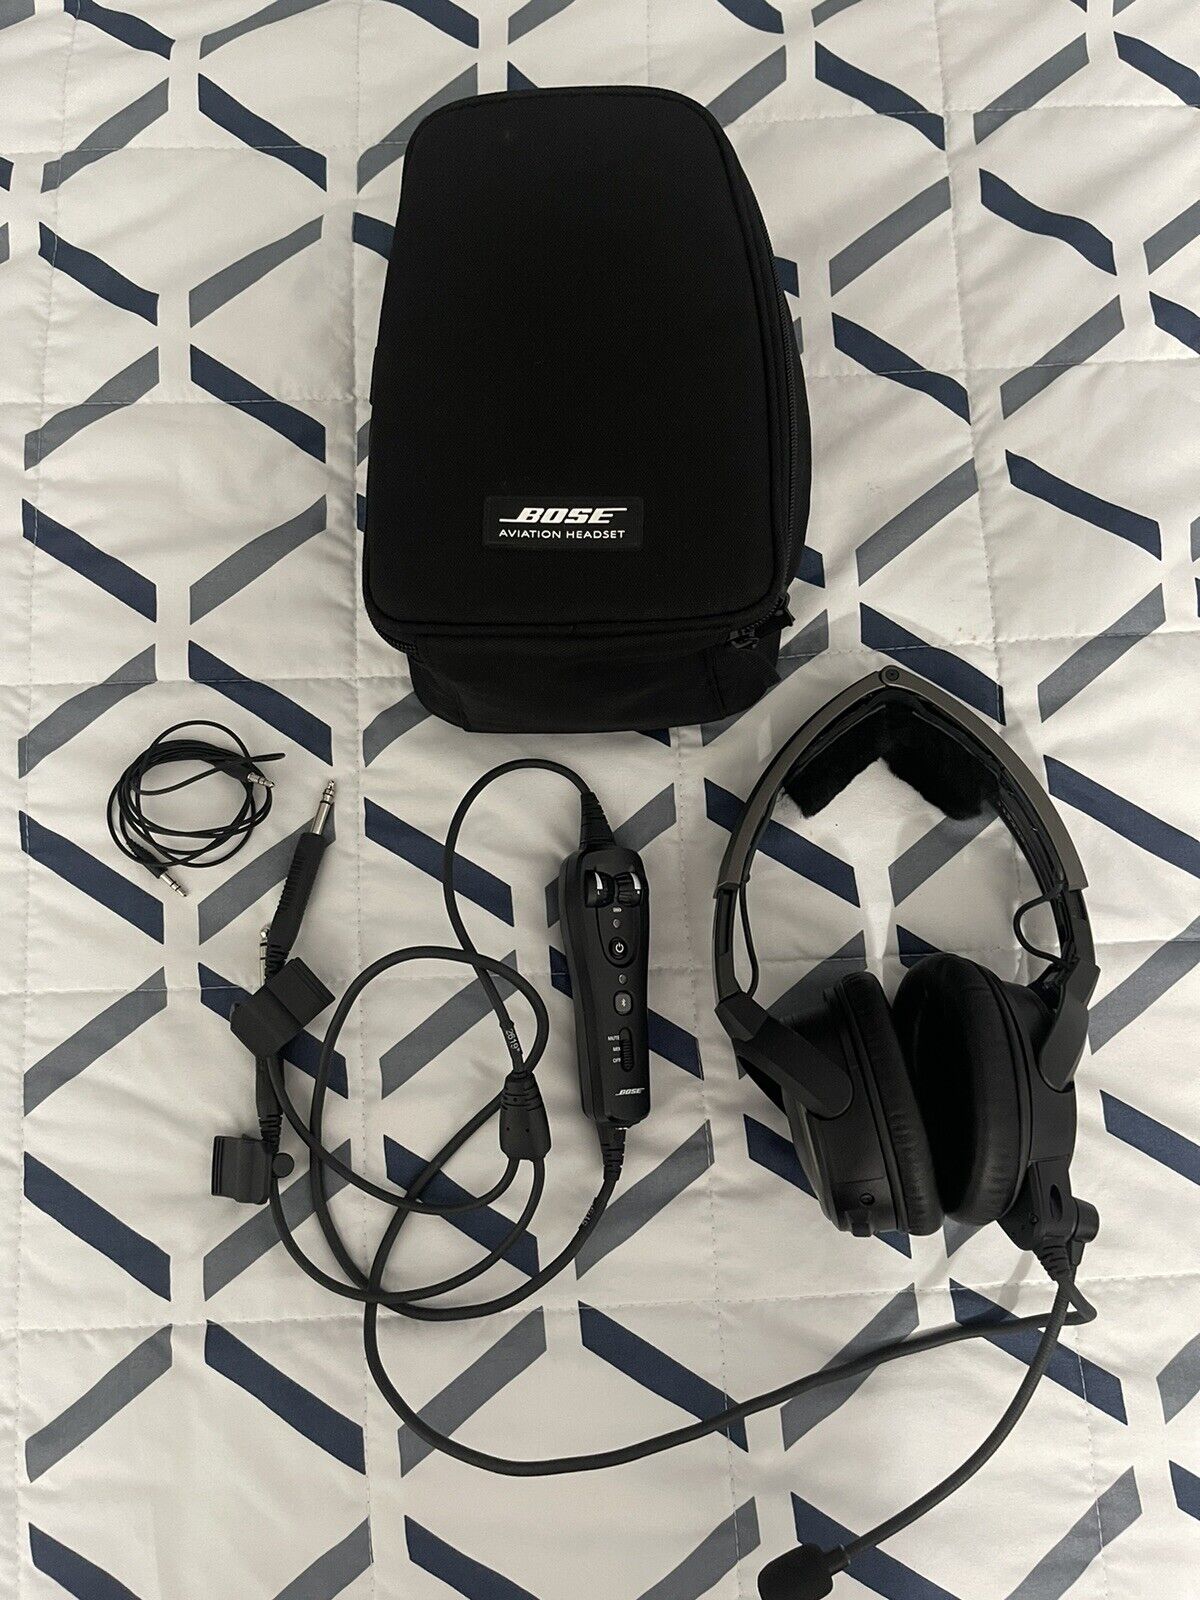 Bose A20 Aviation Headset with Bluetooth Dual Plug Cable - Black